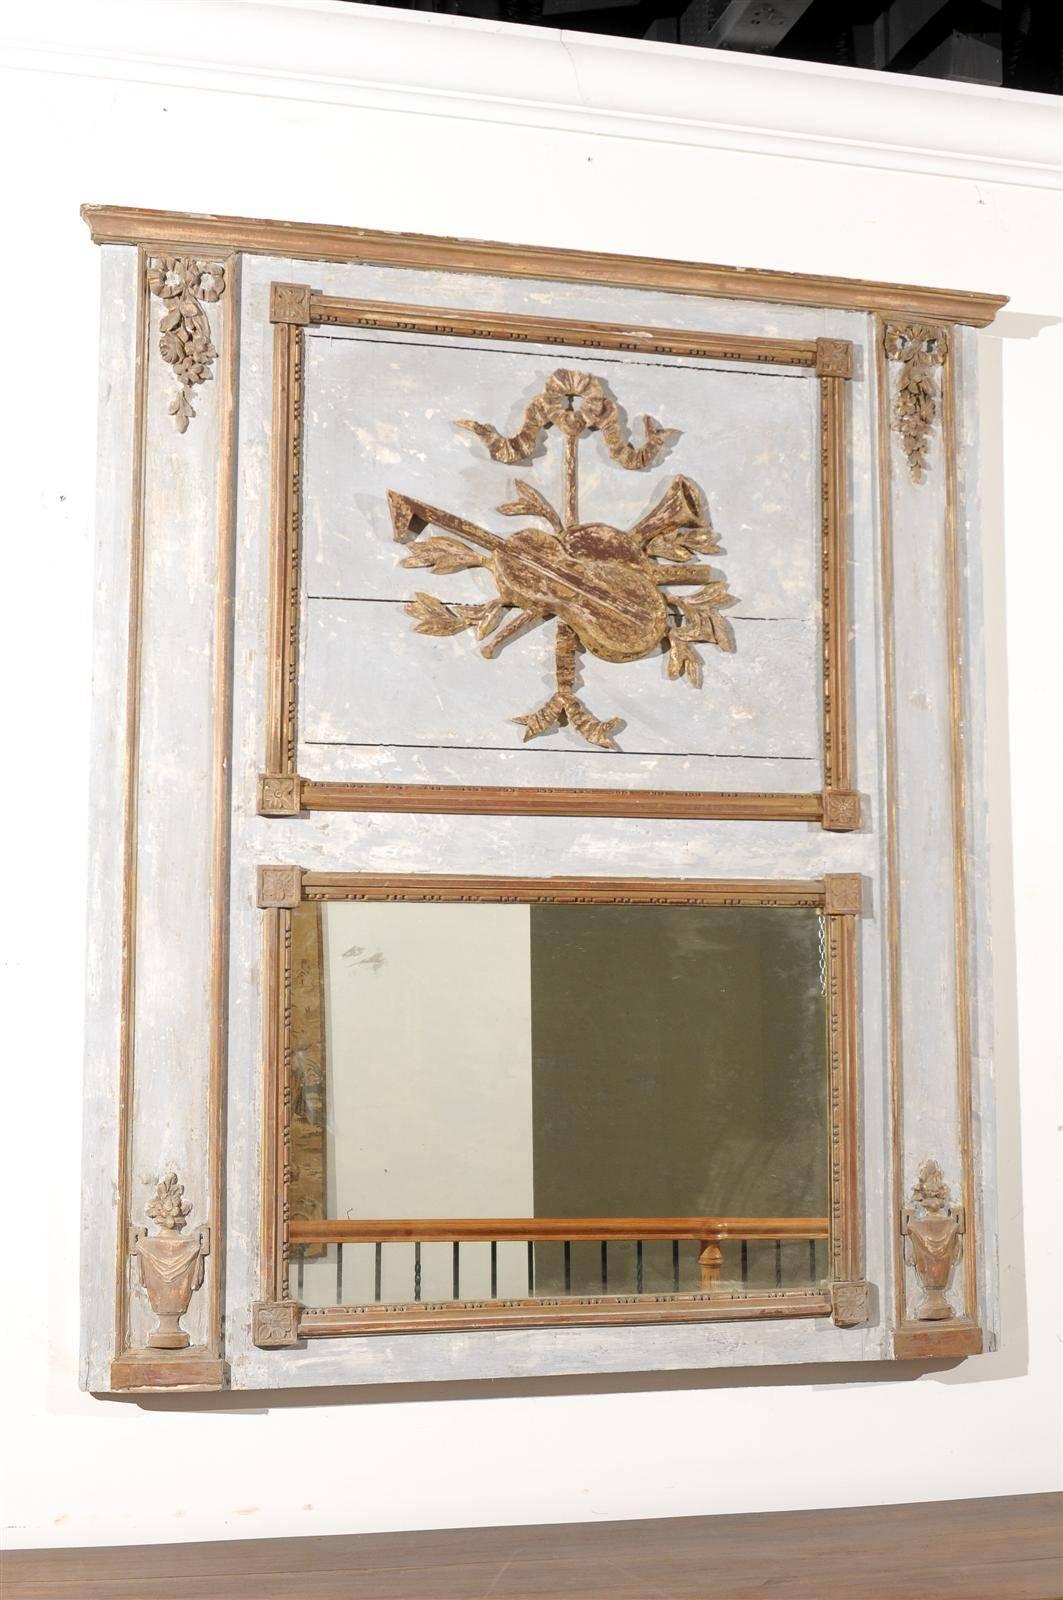 A French Neoclassical Revival painted and gilded trumeau mirror with ribbon-tied musical trophy and urns from the late 19th century. This French mirror was born in the later years of the 19th century, at a time when Neoclassicism, that had spread